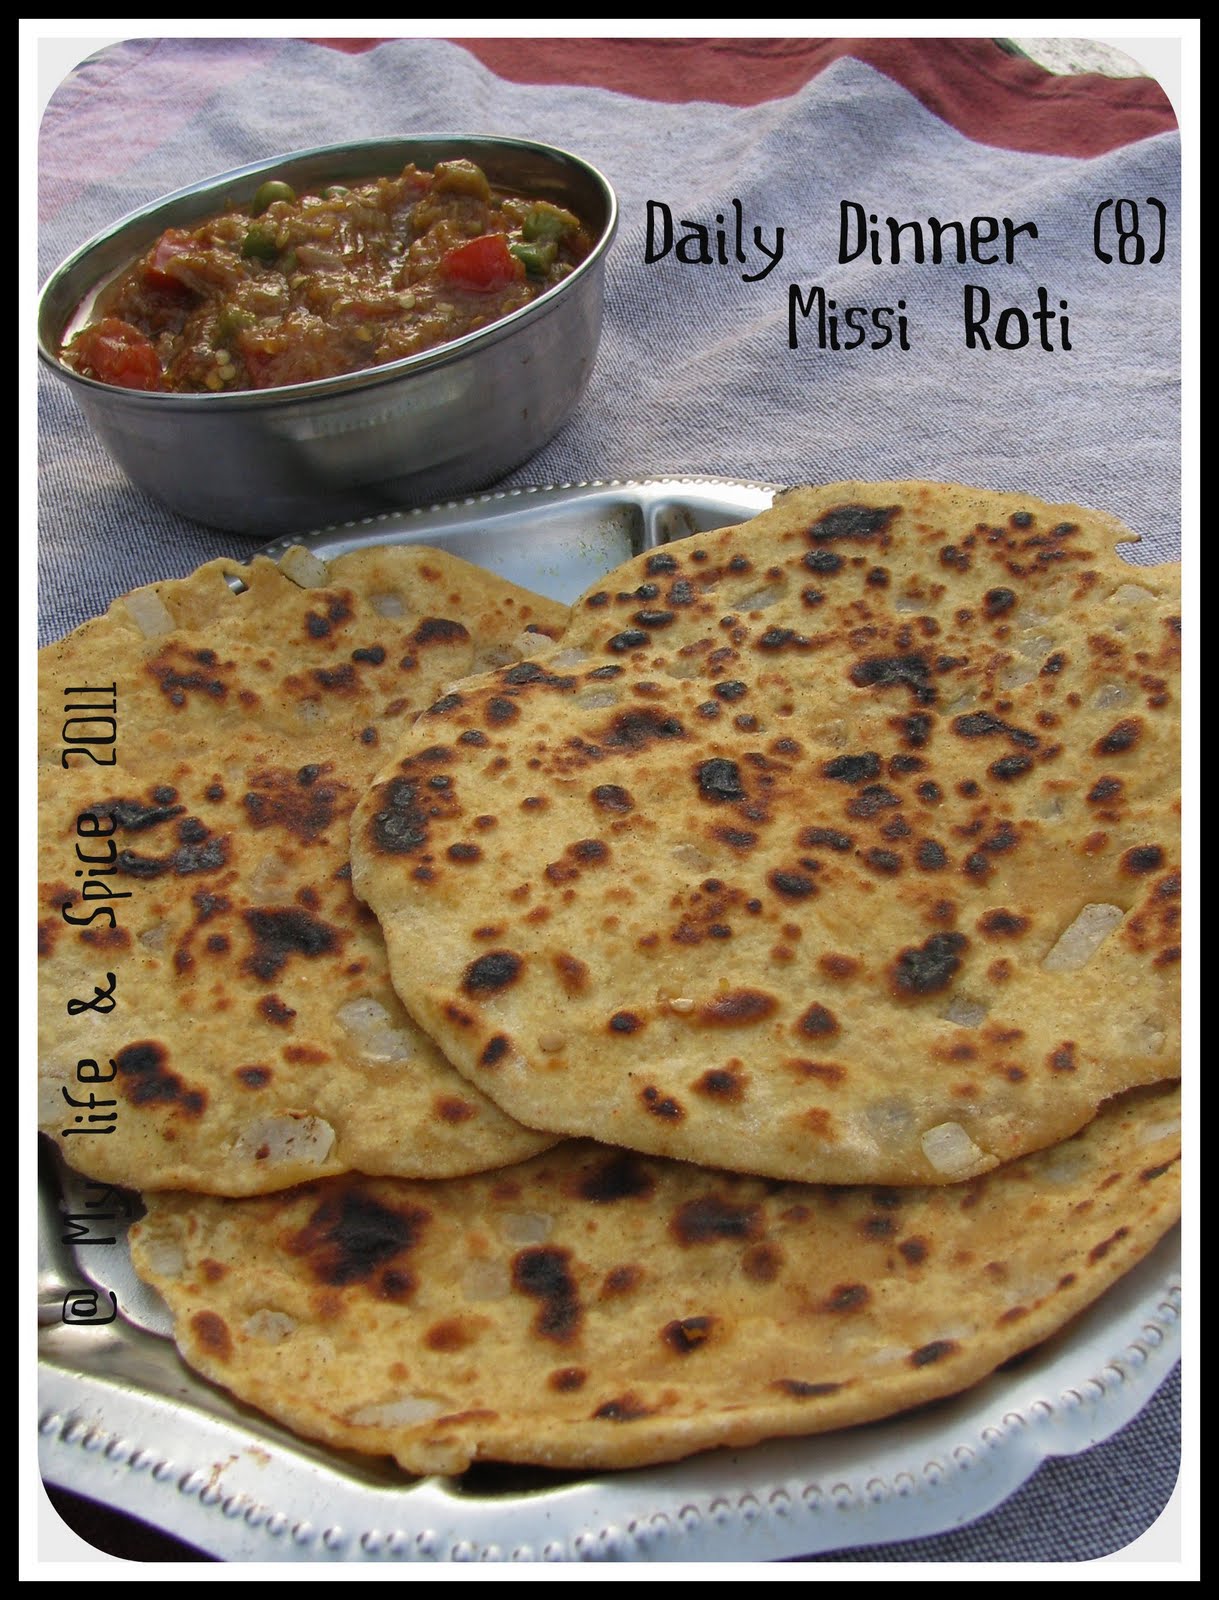 My Life and Spice: Daily Dinner (8): Rajasthani Missi Roti (Plus a repost)